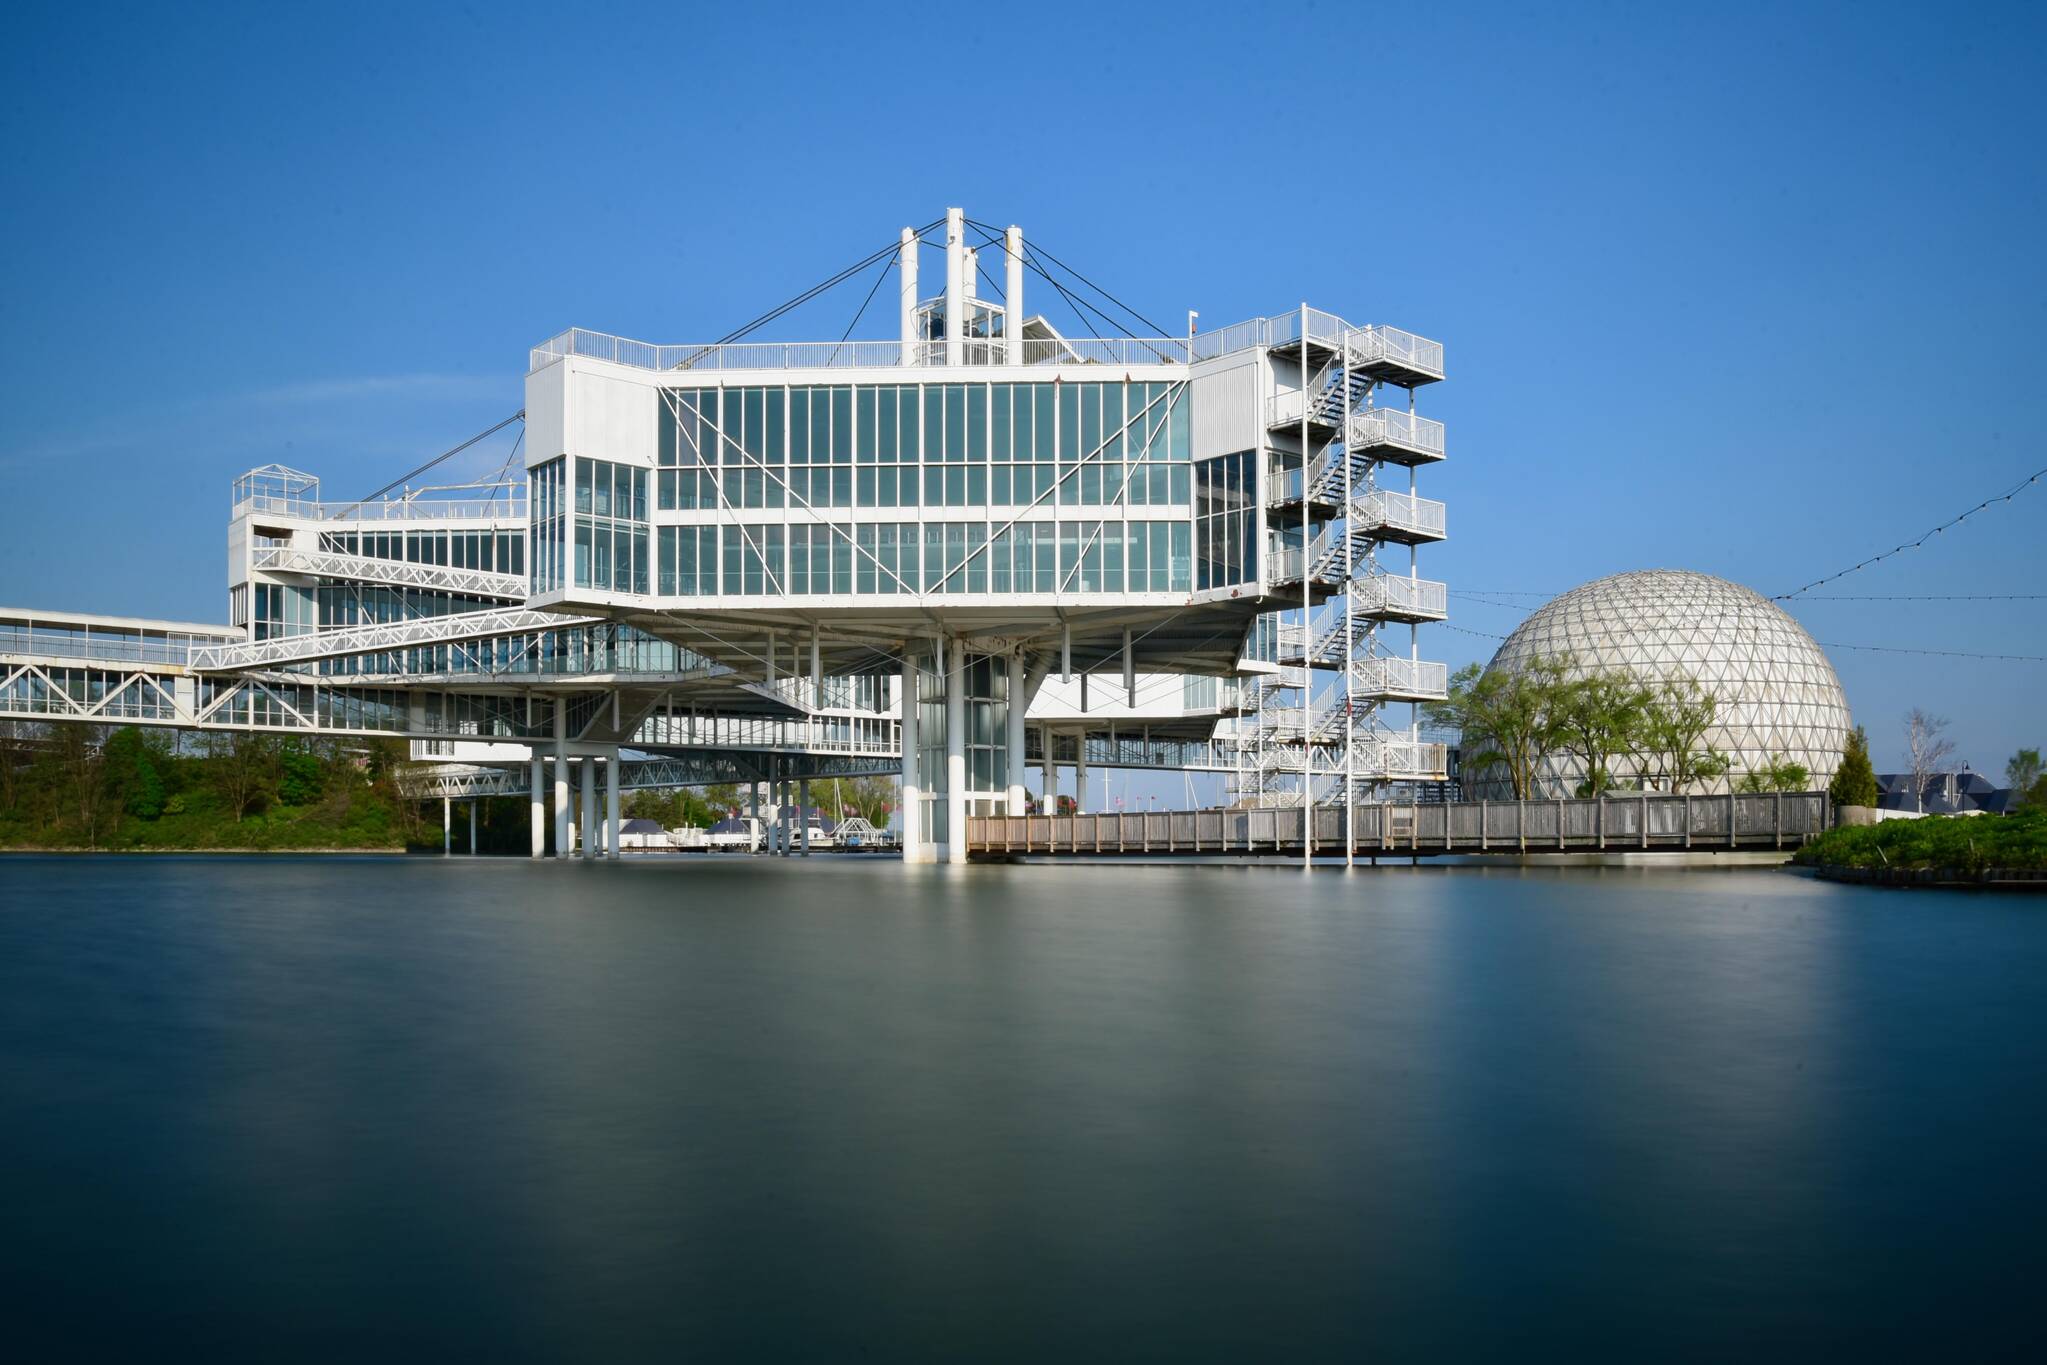 Ontario Place could get heritage protection